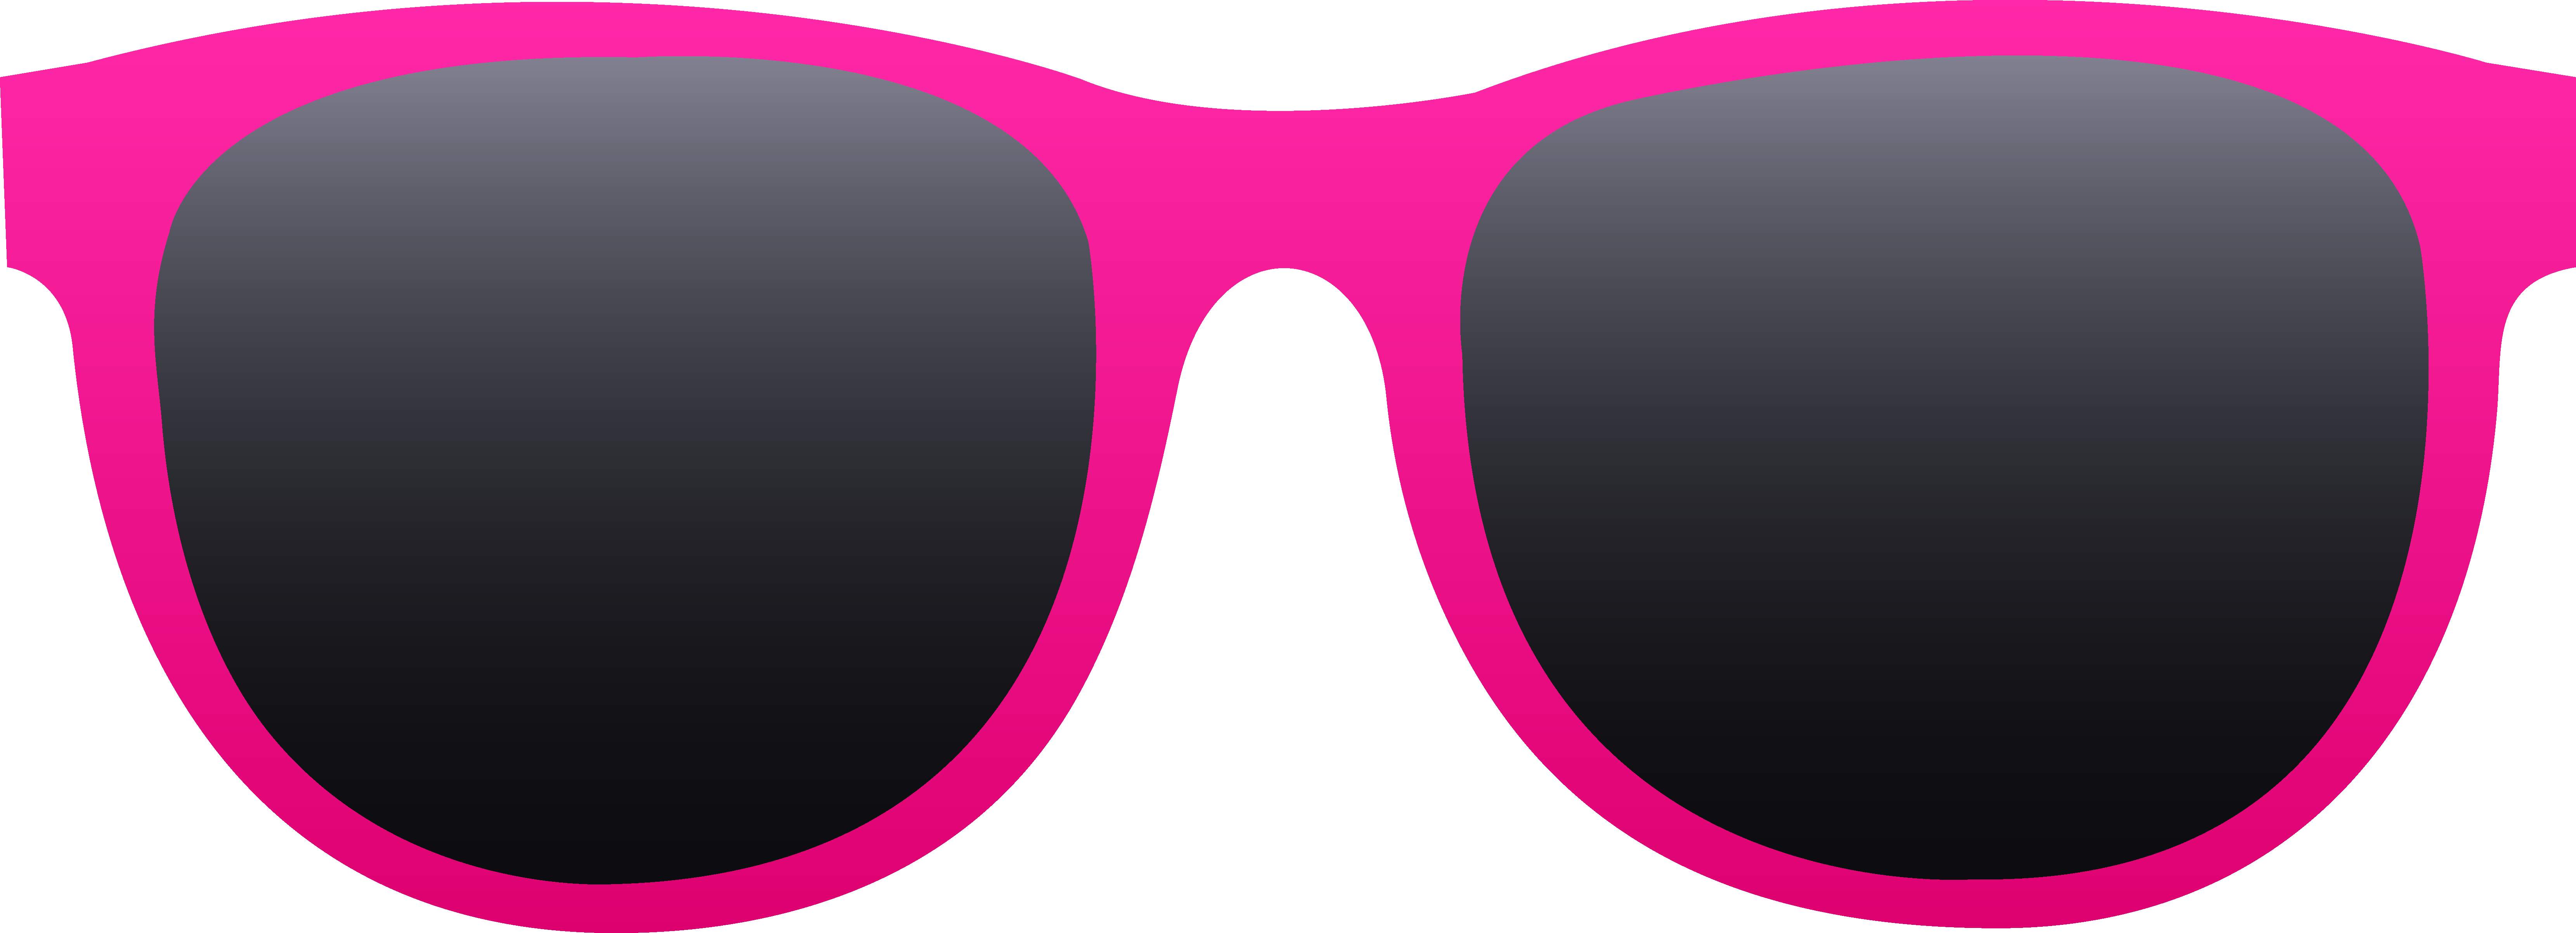 Sunglasses Clip Art | Clipart library - Free Clipart Images